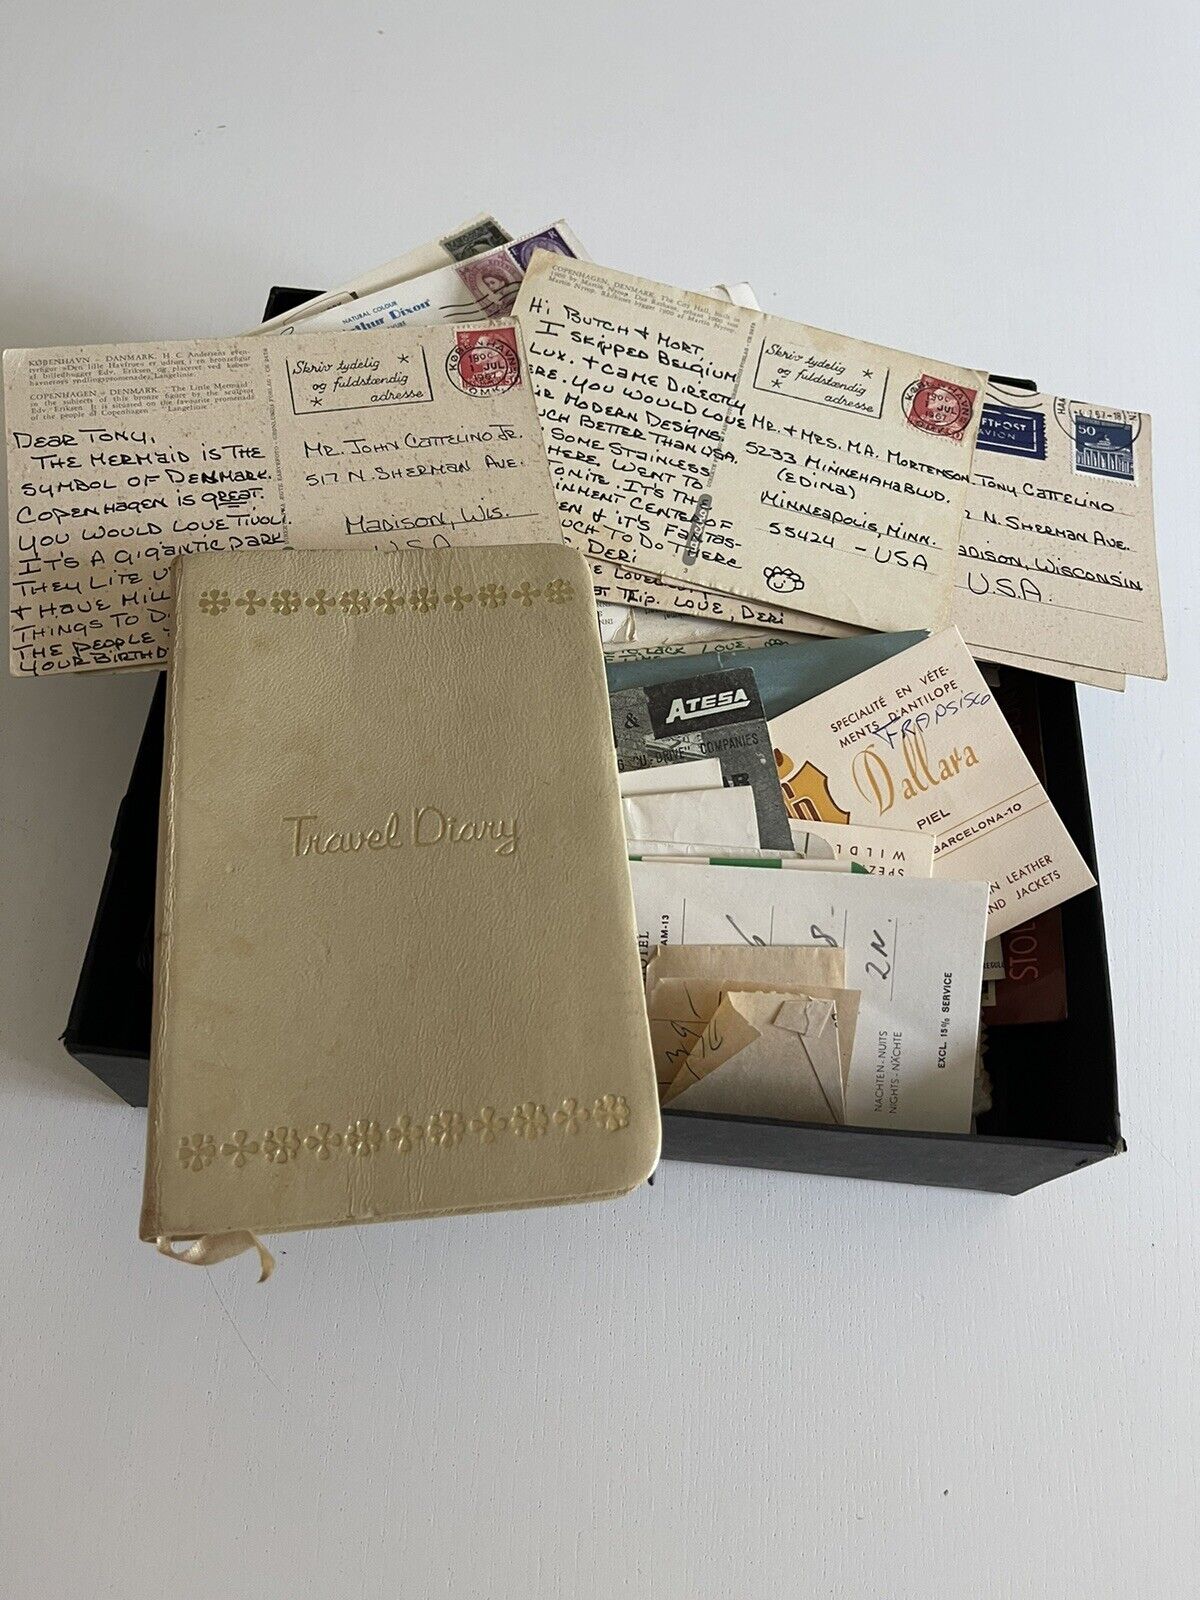 1967 Travel Diary, Post Cards & Other Misc Travel Ephemera.  Brochures, Tickets